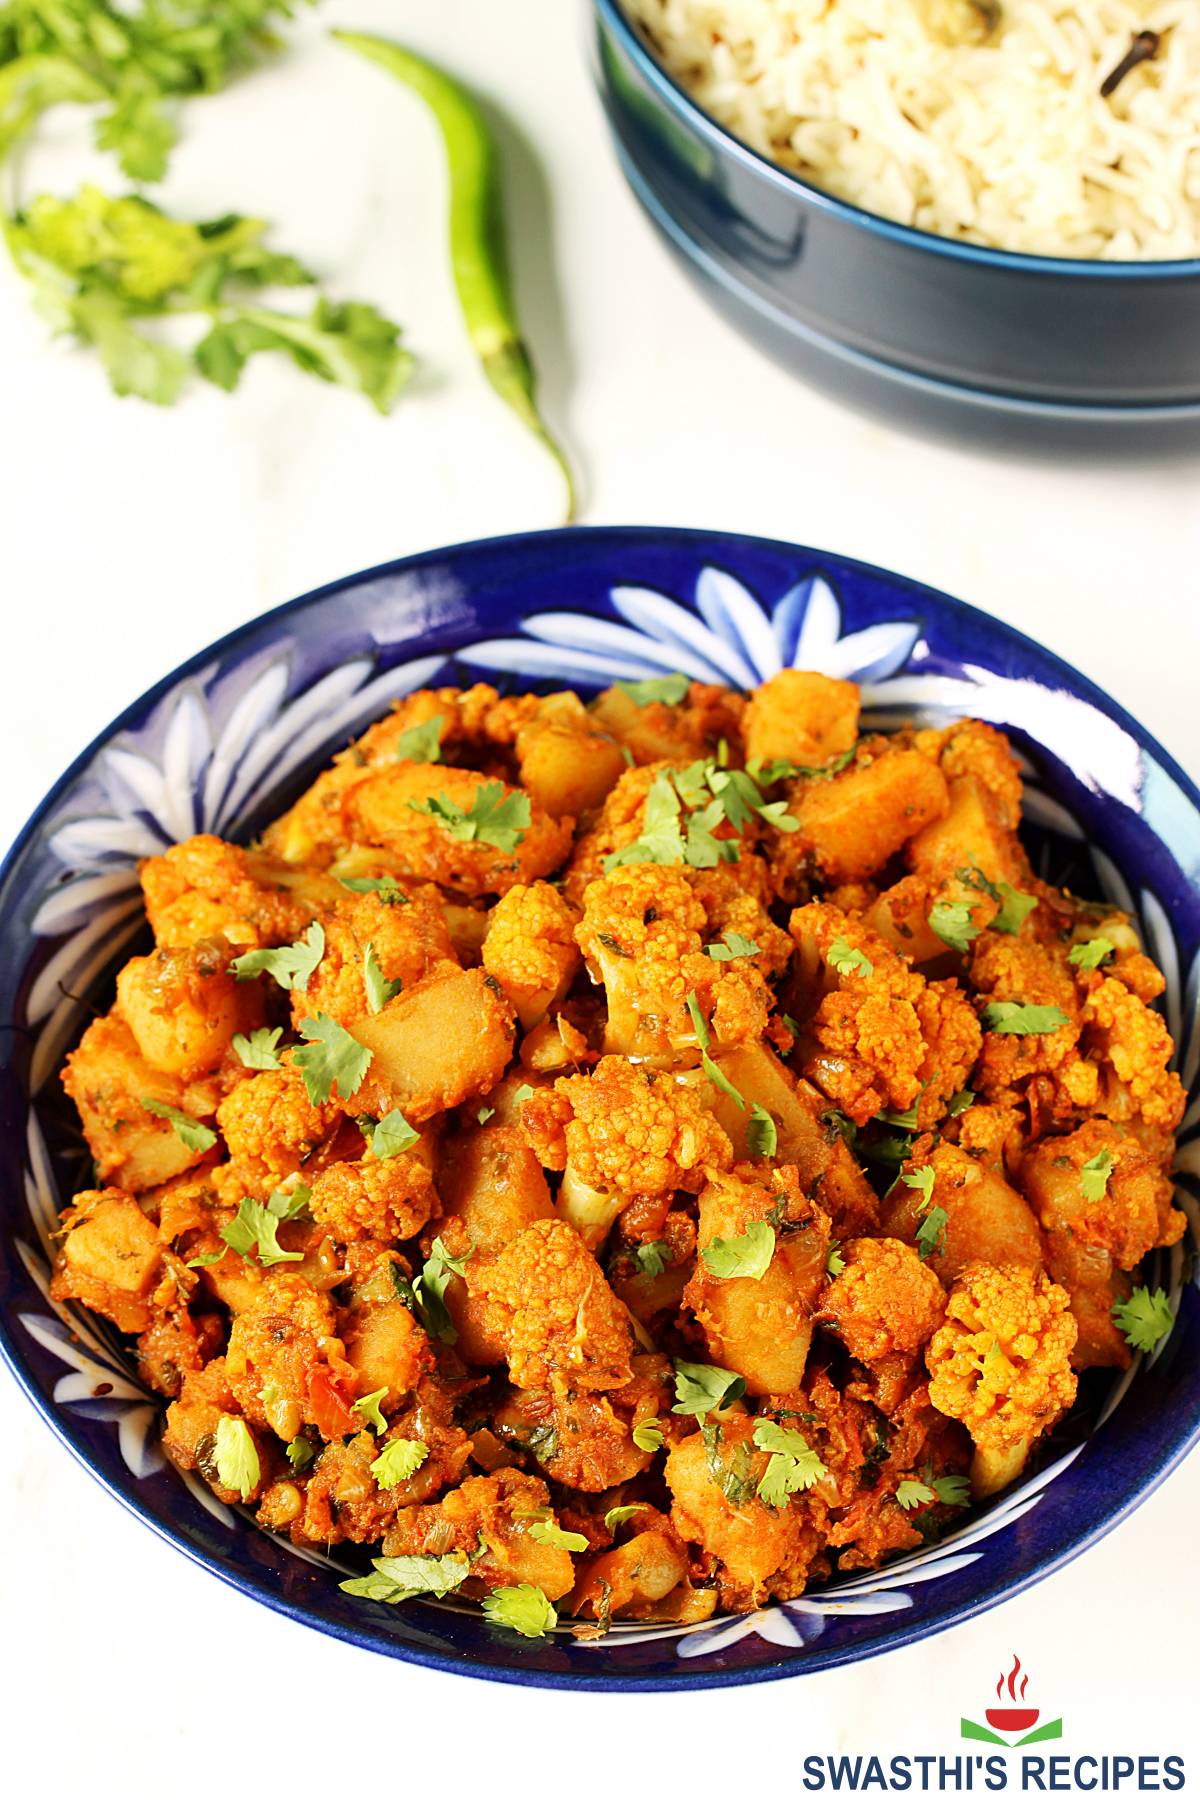 Aloo gobi made with potatoes, cauliflower and spices.